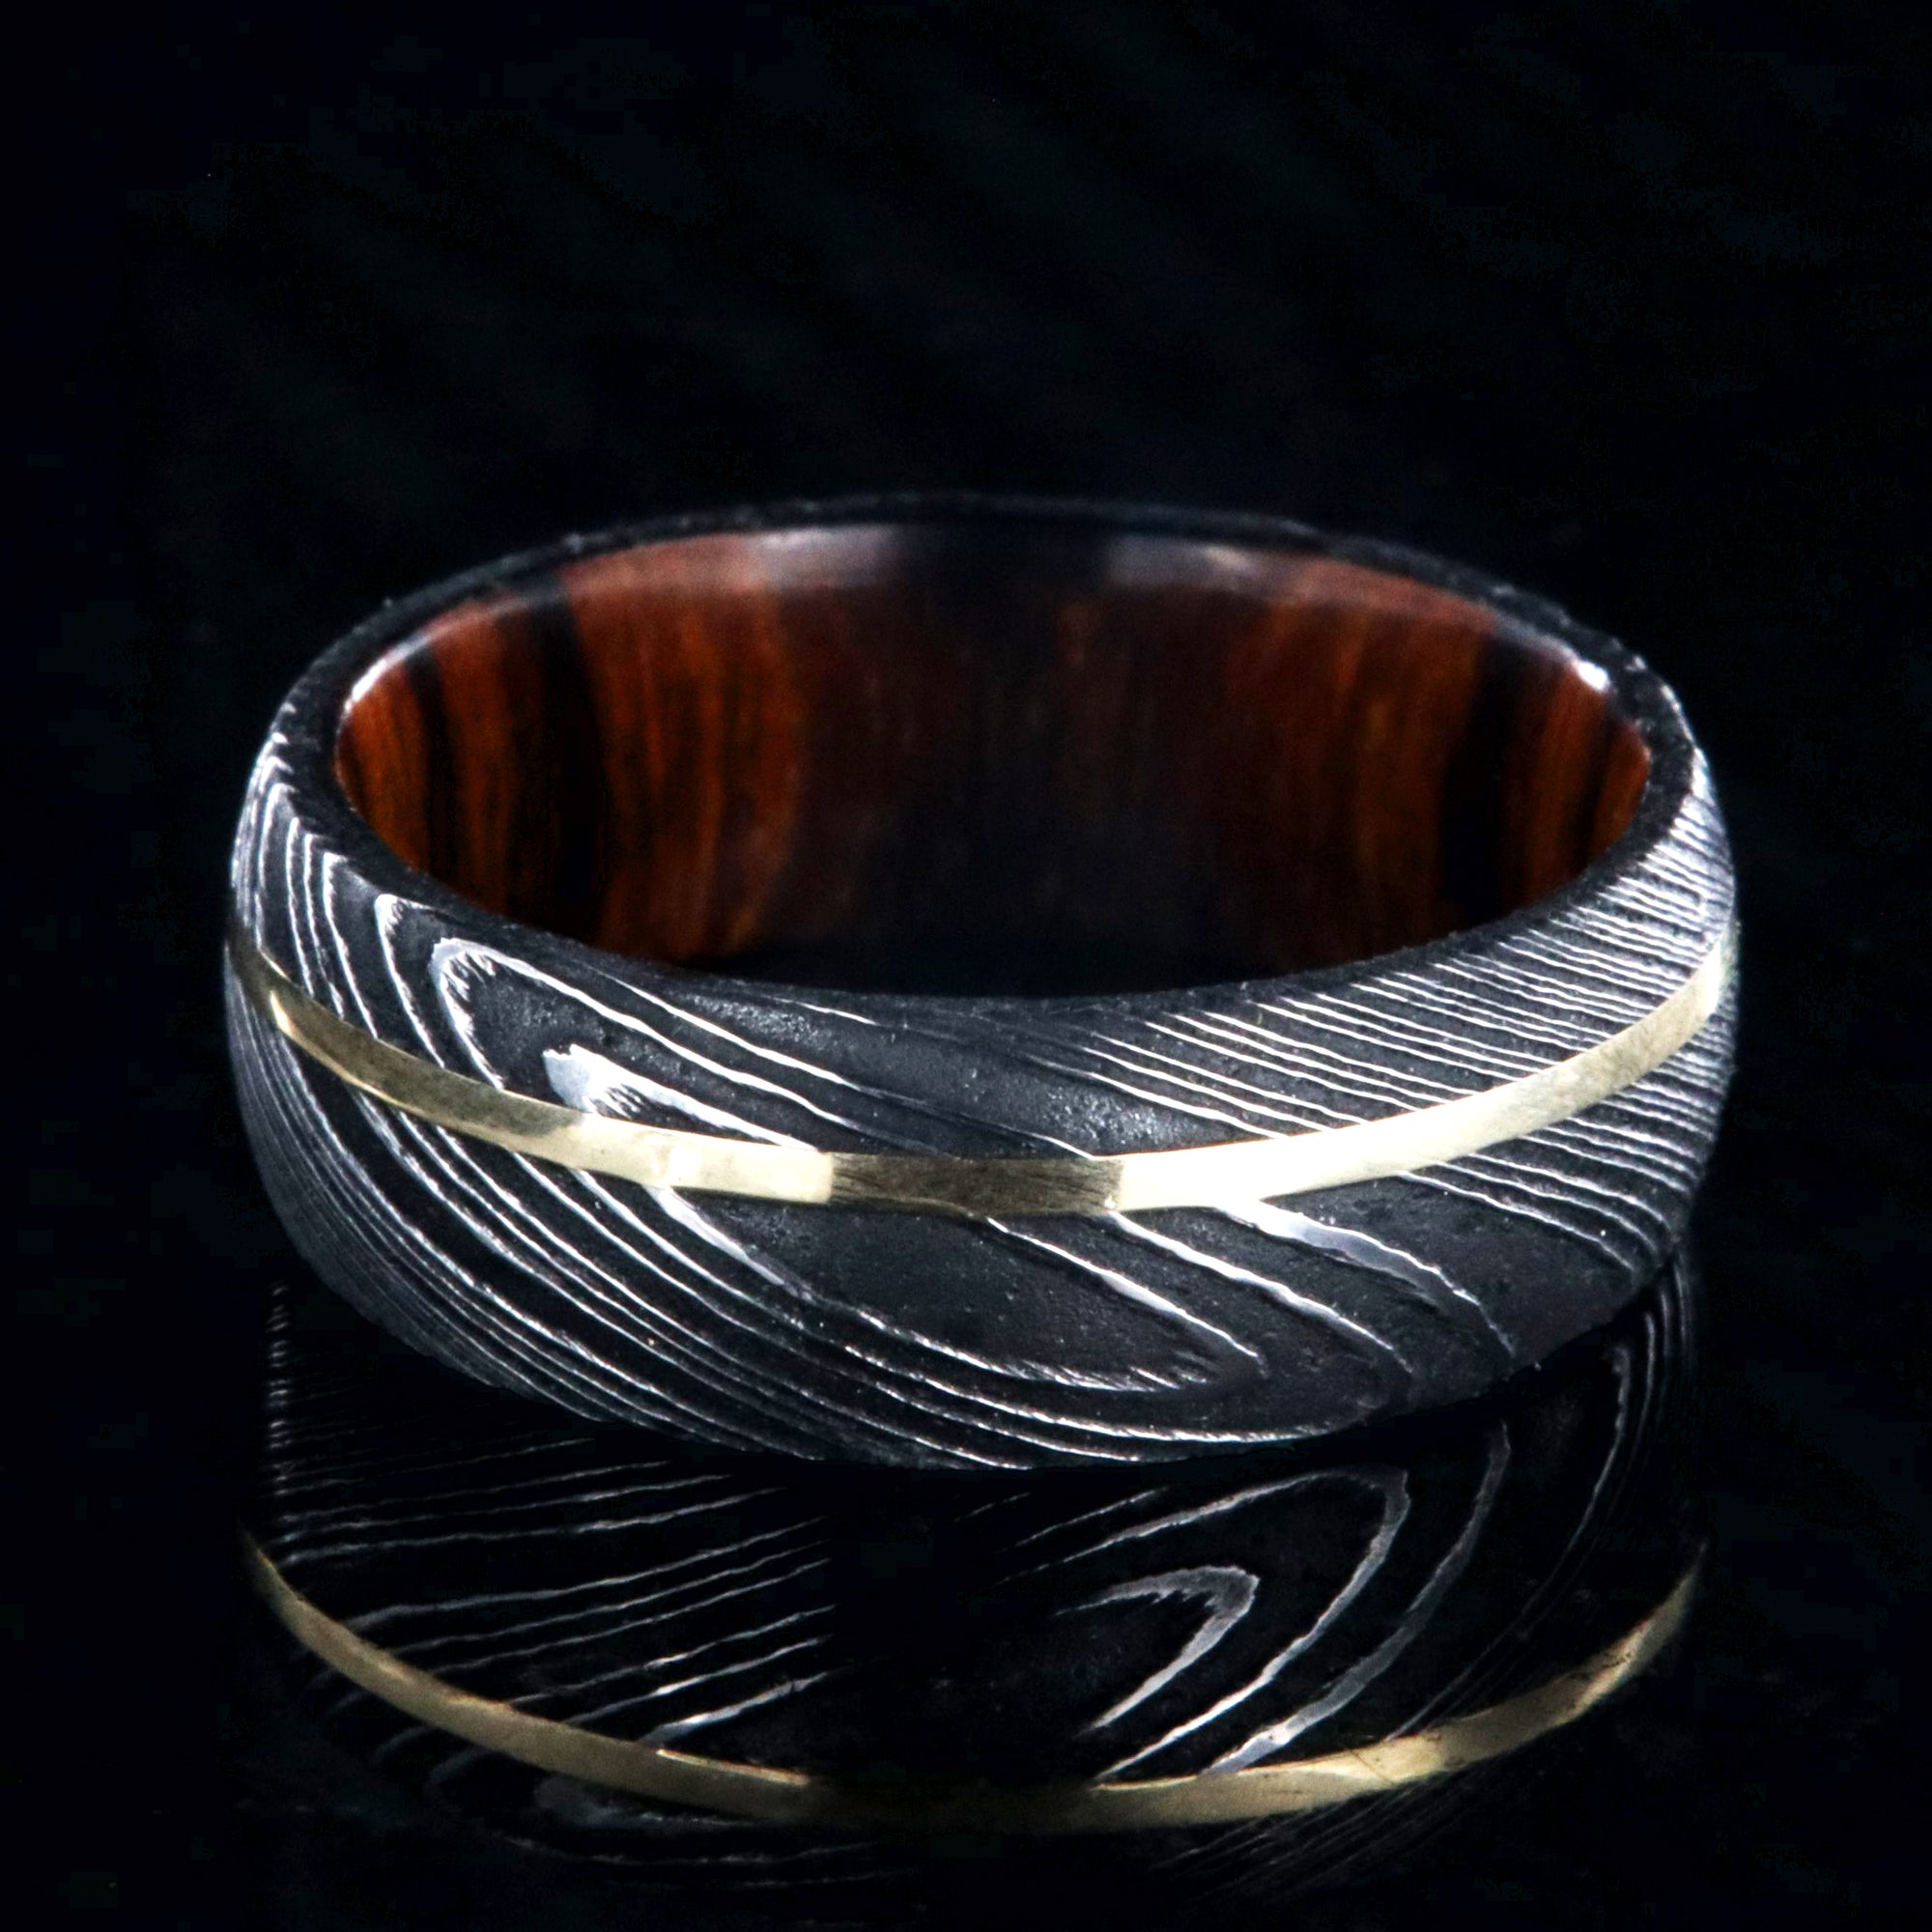 8mm wide black Damascus steel wedding band with rounded profile, an off-center yellow gold inlay, and Arizona ironwood sleeve